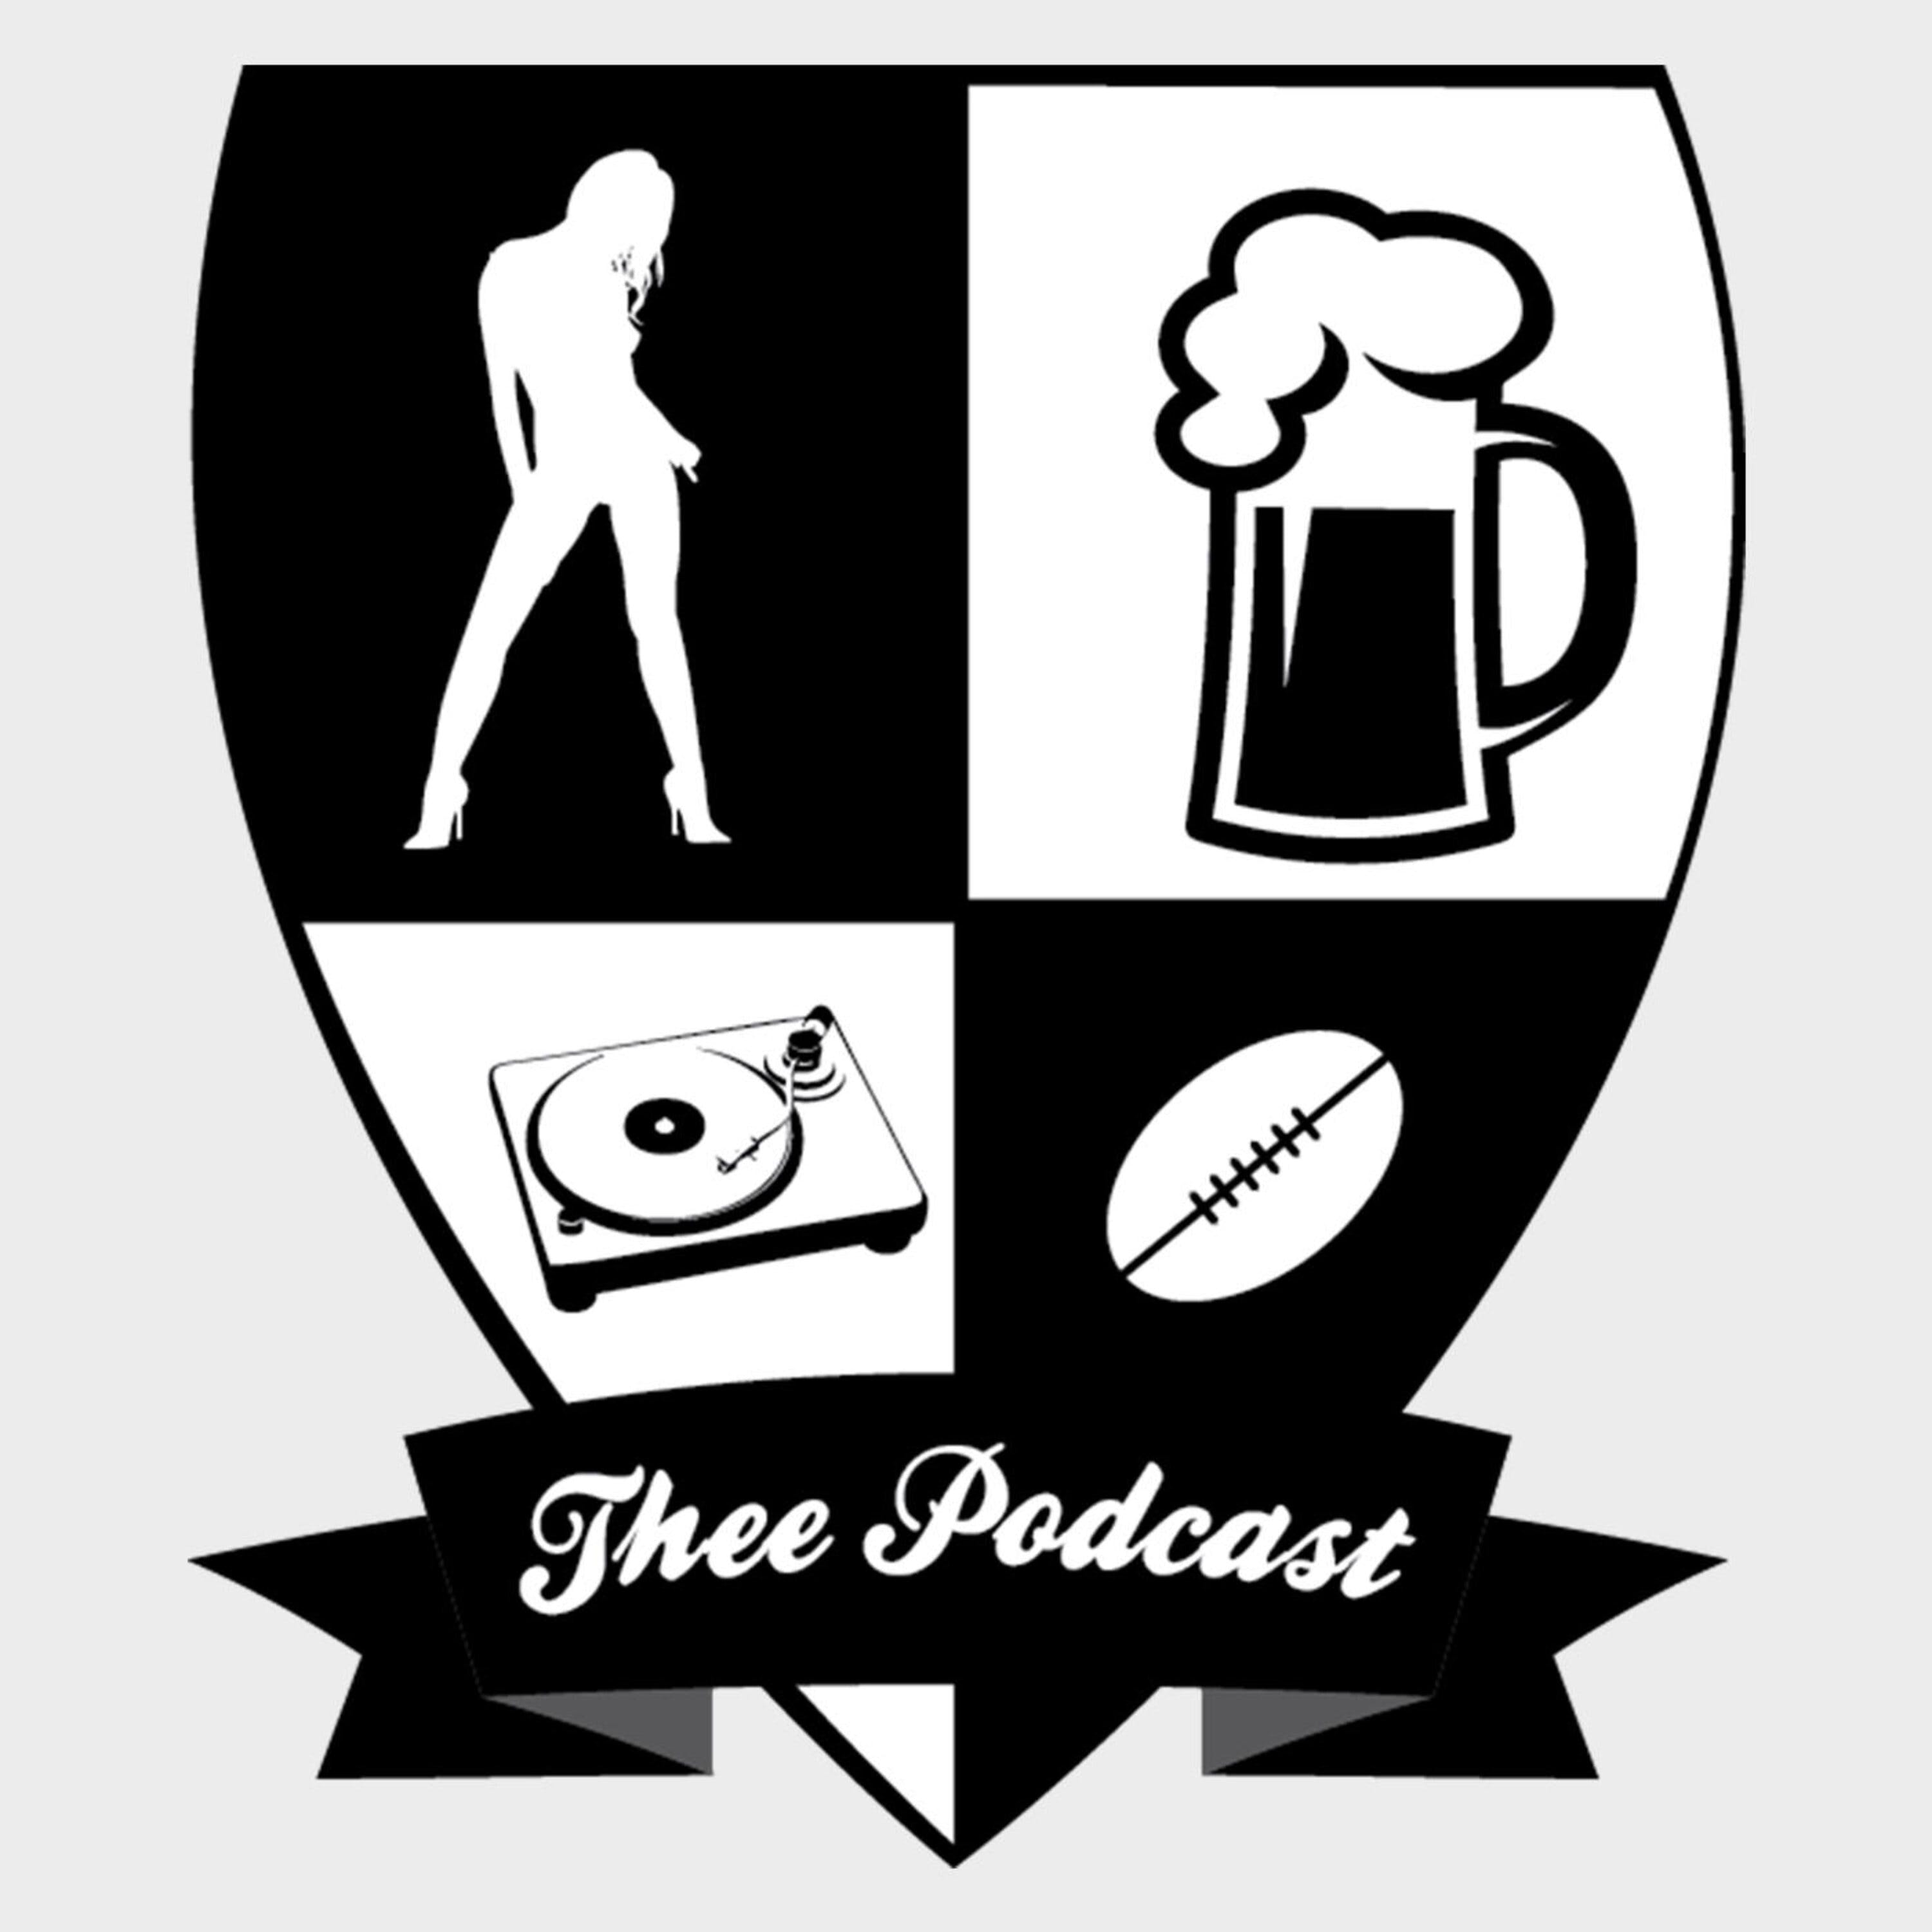 Thee Podcast Episode 373